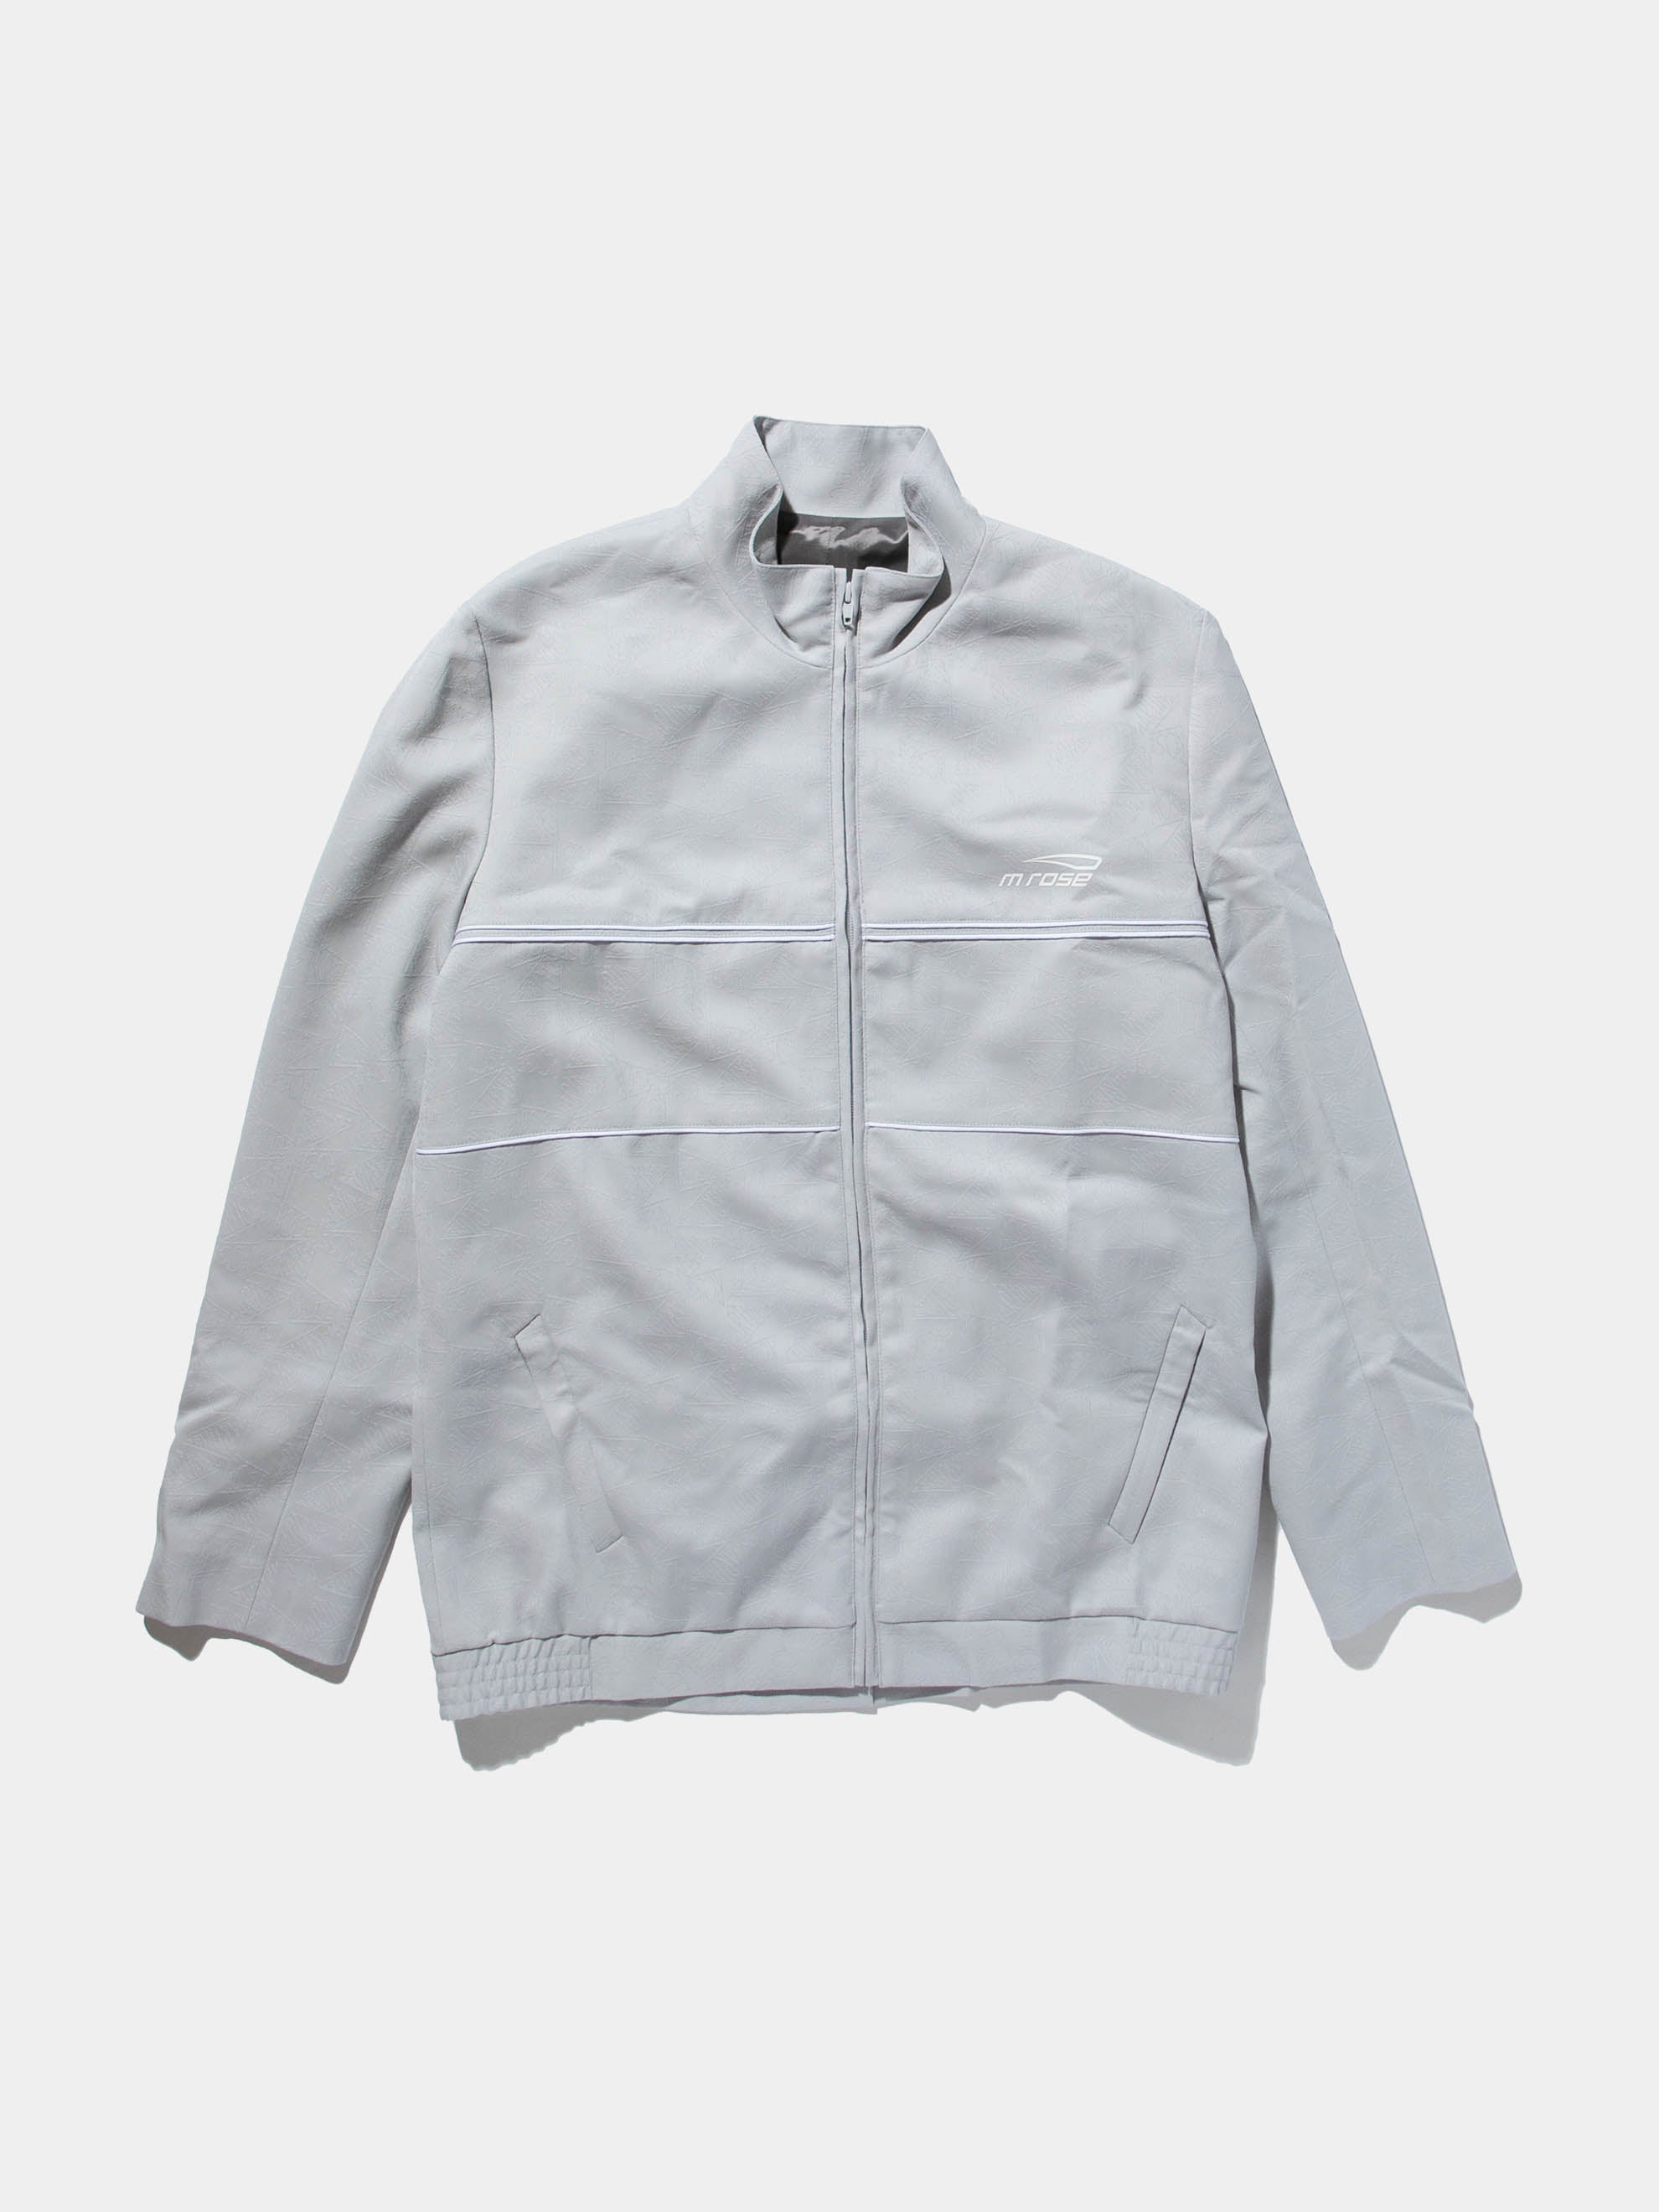 Buy Martine Rose TAILORED TRACK JACKET Online at UNION LOS ANGELES